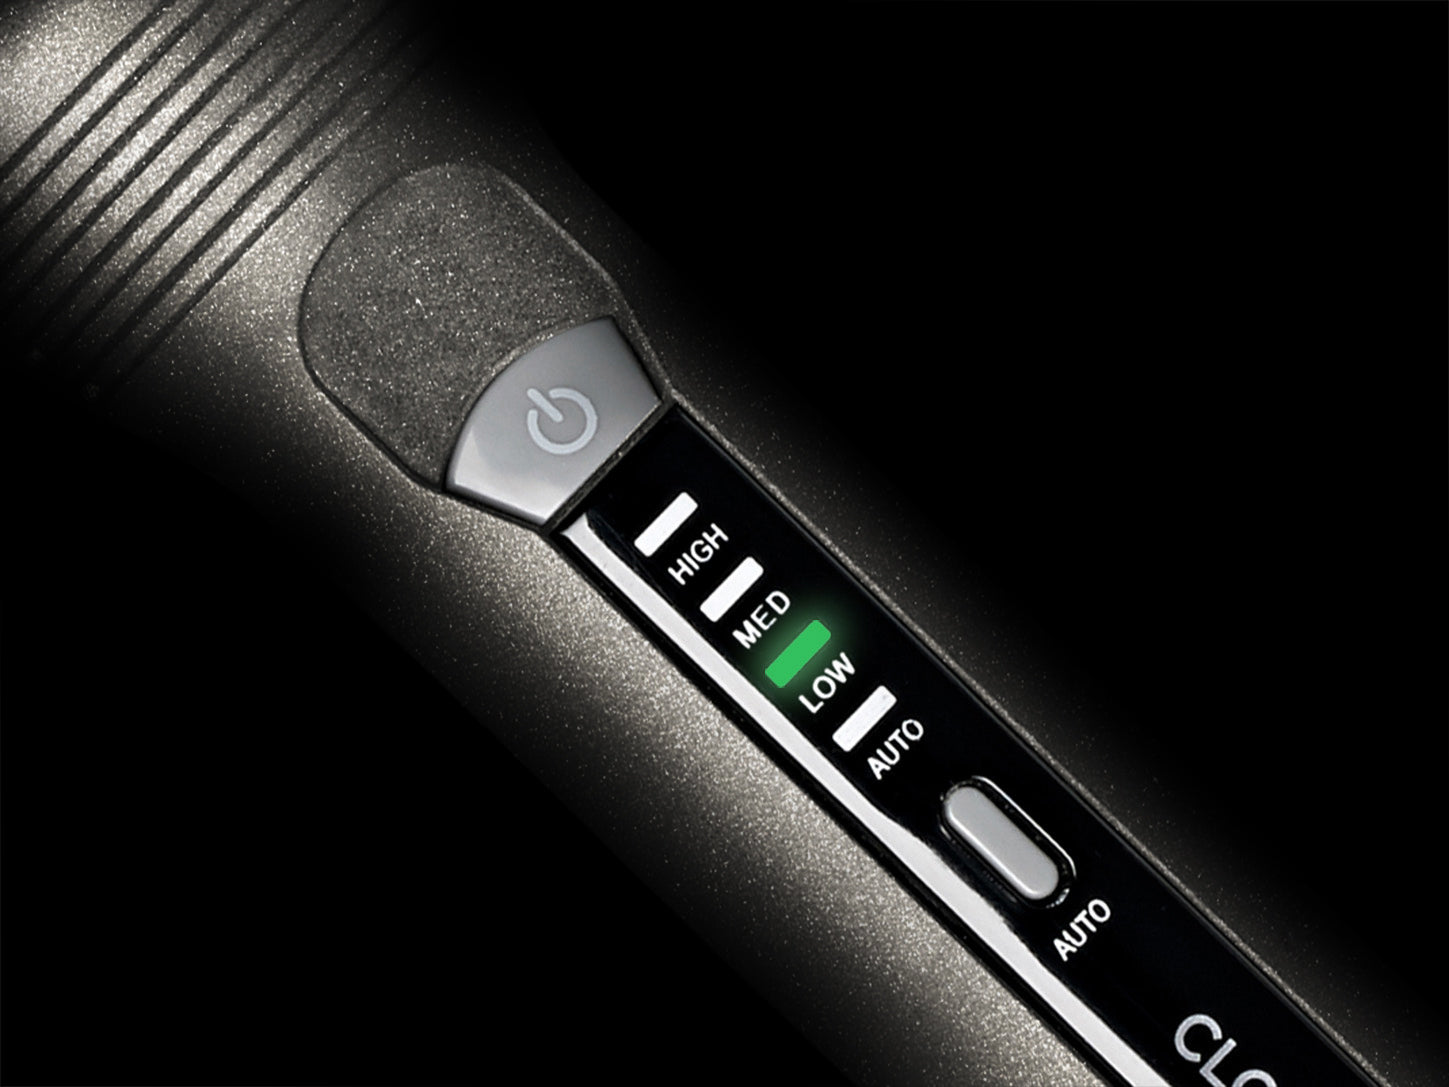 Close up of the variable temperature setting on the Sericite Curling Wand.